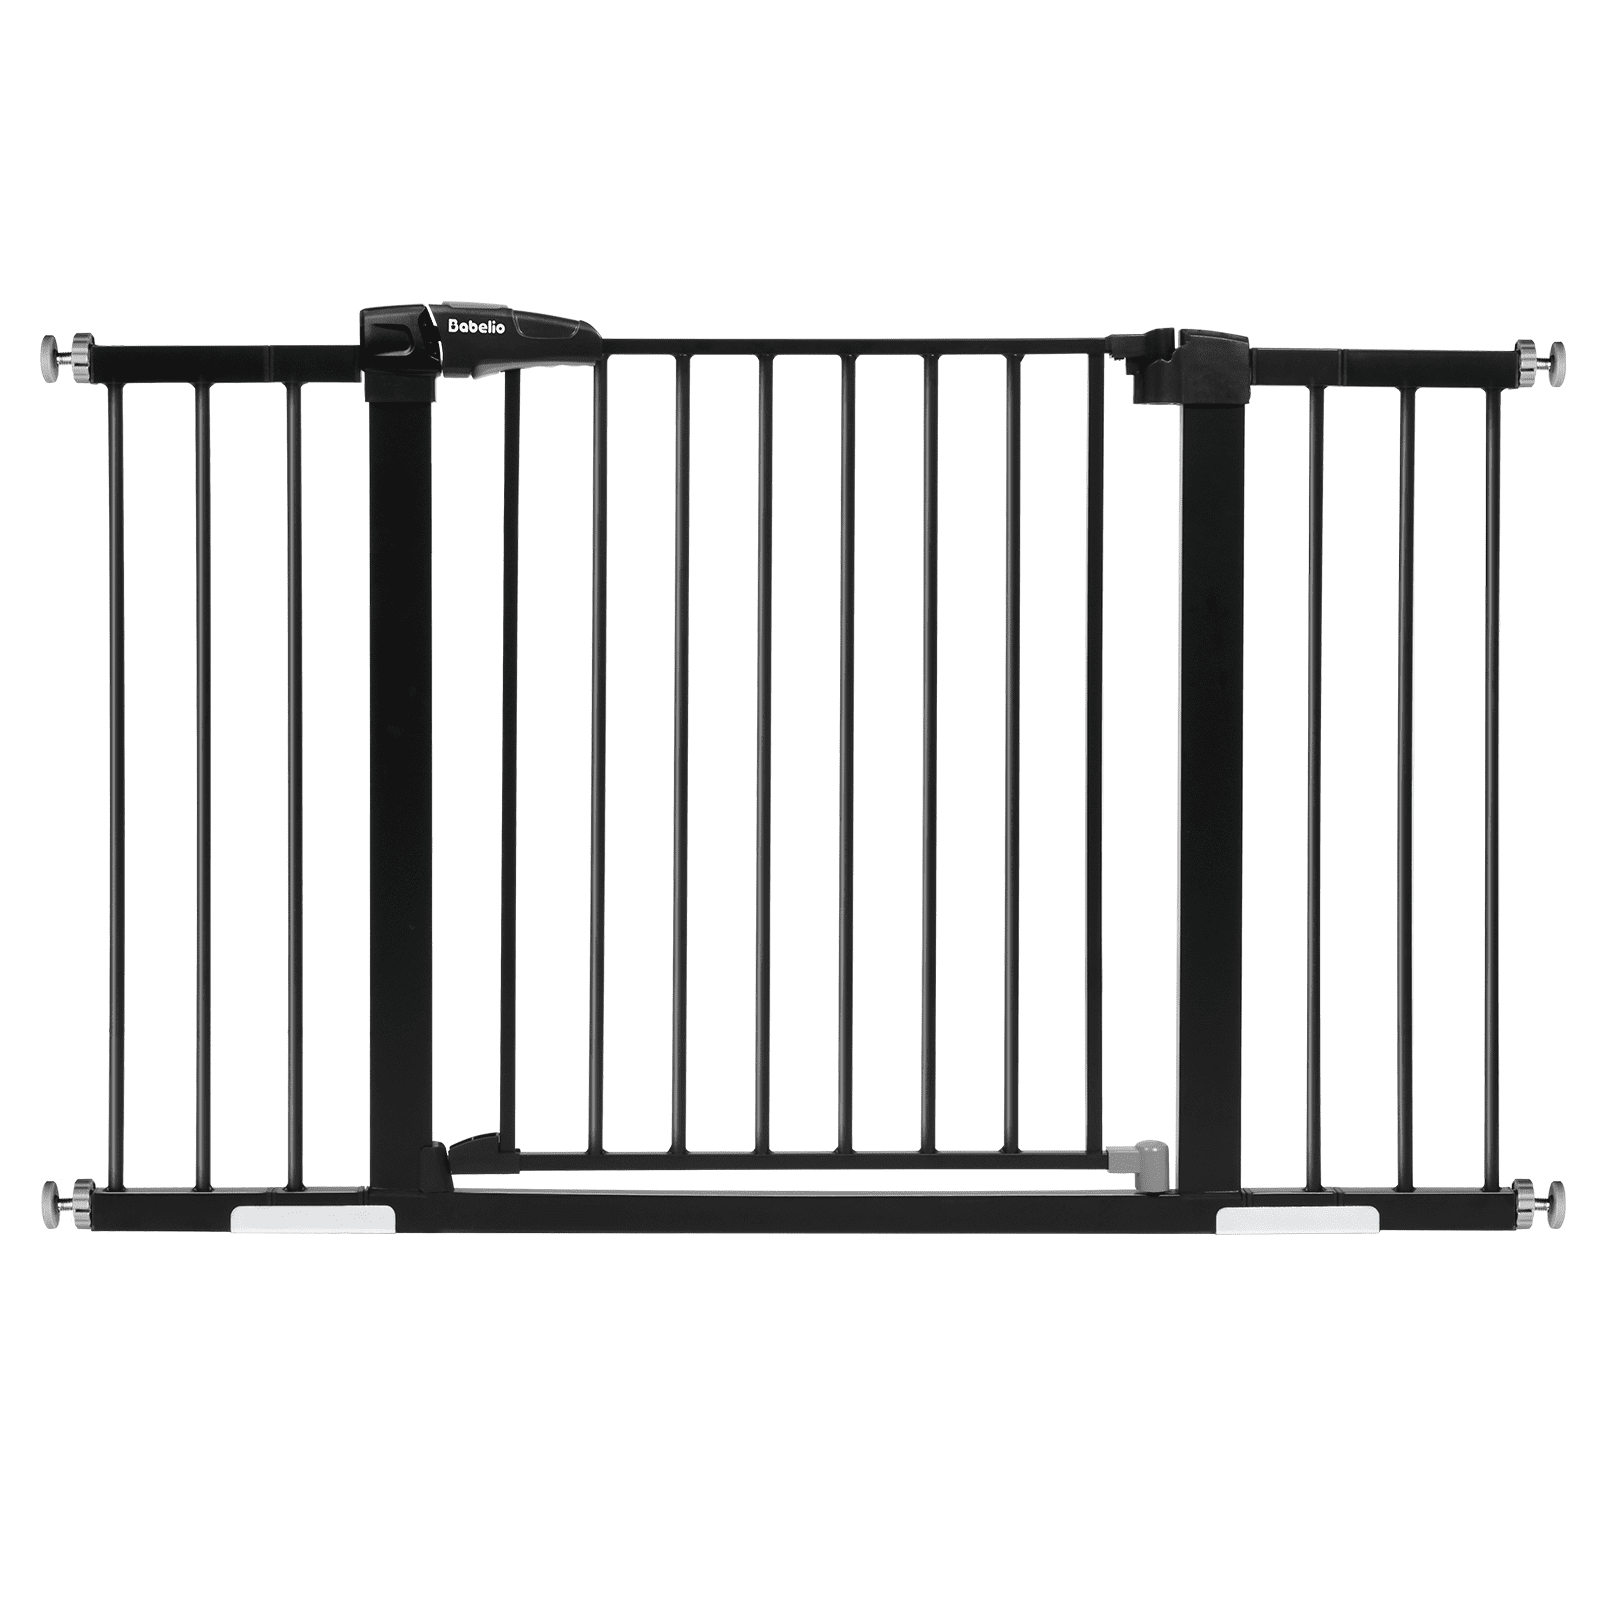 Stairs Easy Walk Thru Dog Gate with pet Door 29-43 Metal Cat Gate for Doorway Babelio Auto Close Baby Gate with Small Cat Door House Includes 4 Wall Cups and 3 Extension Pieces 